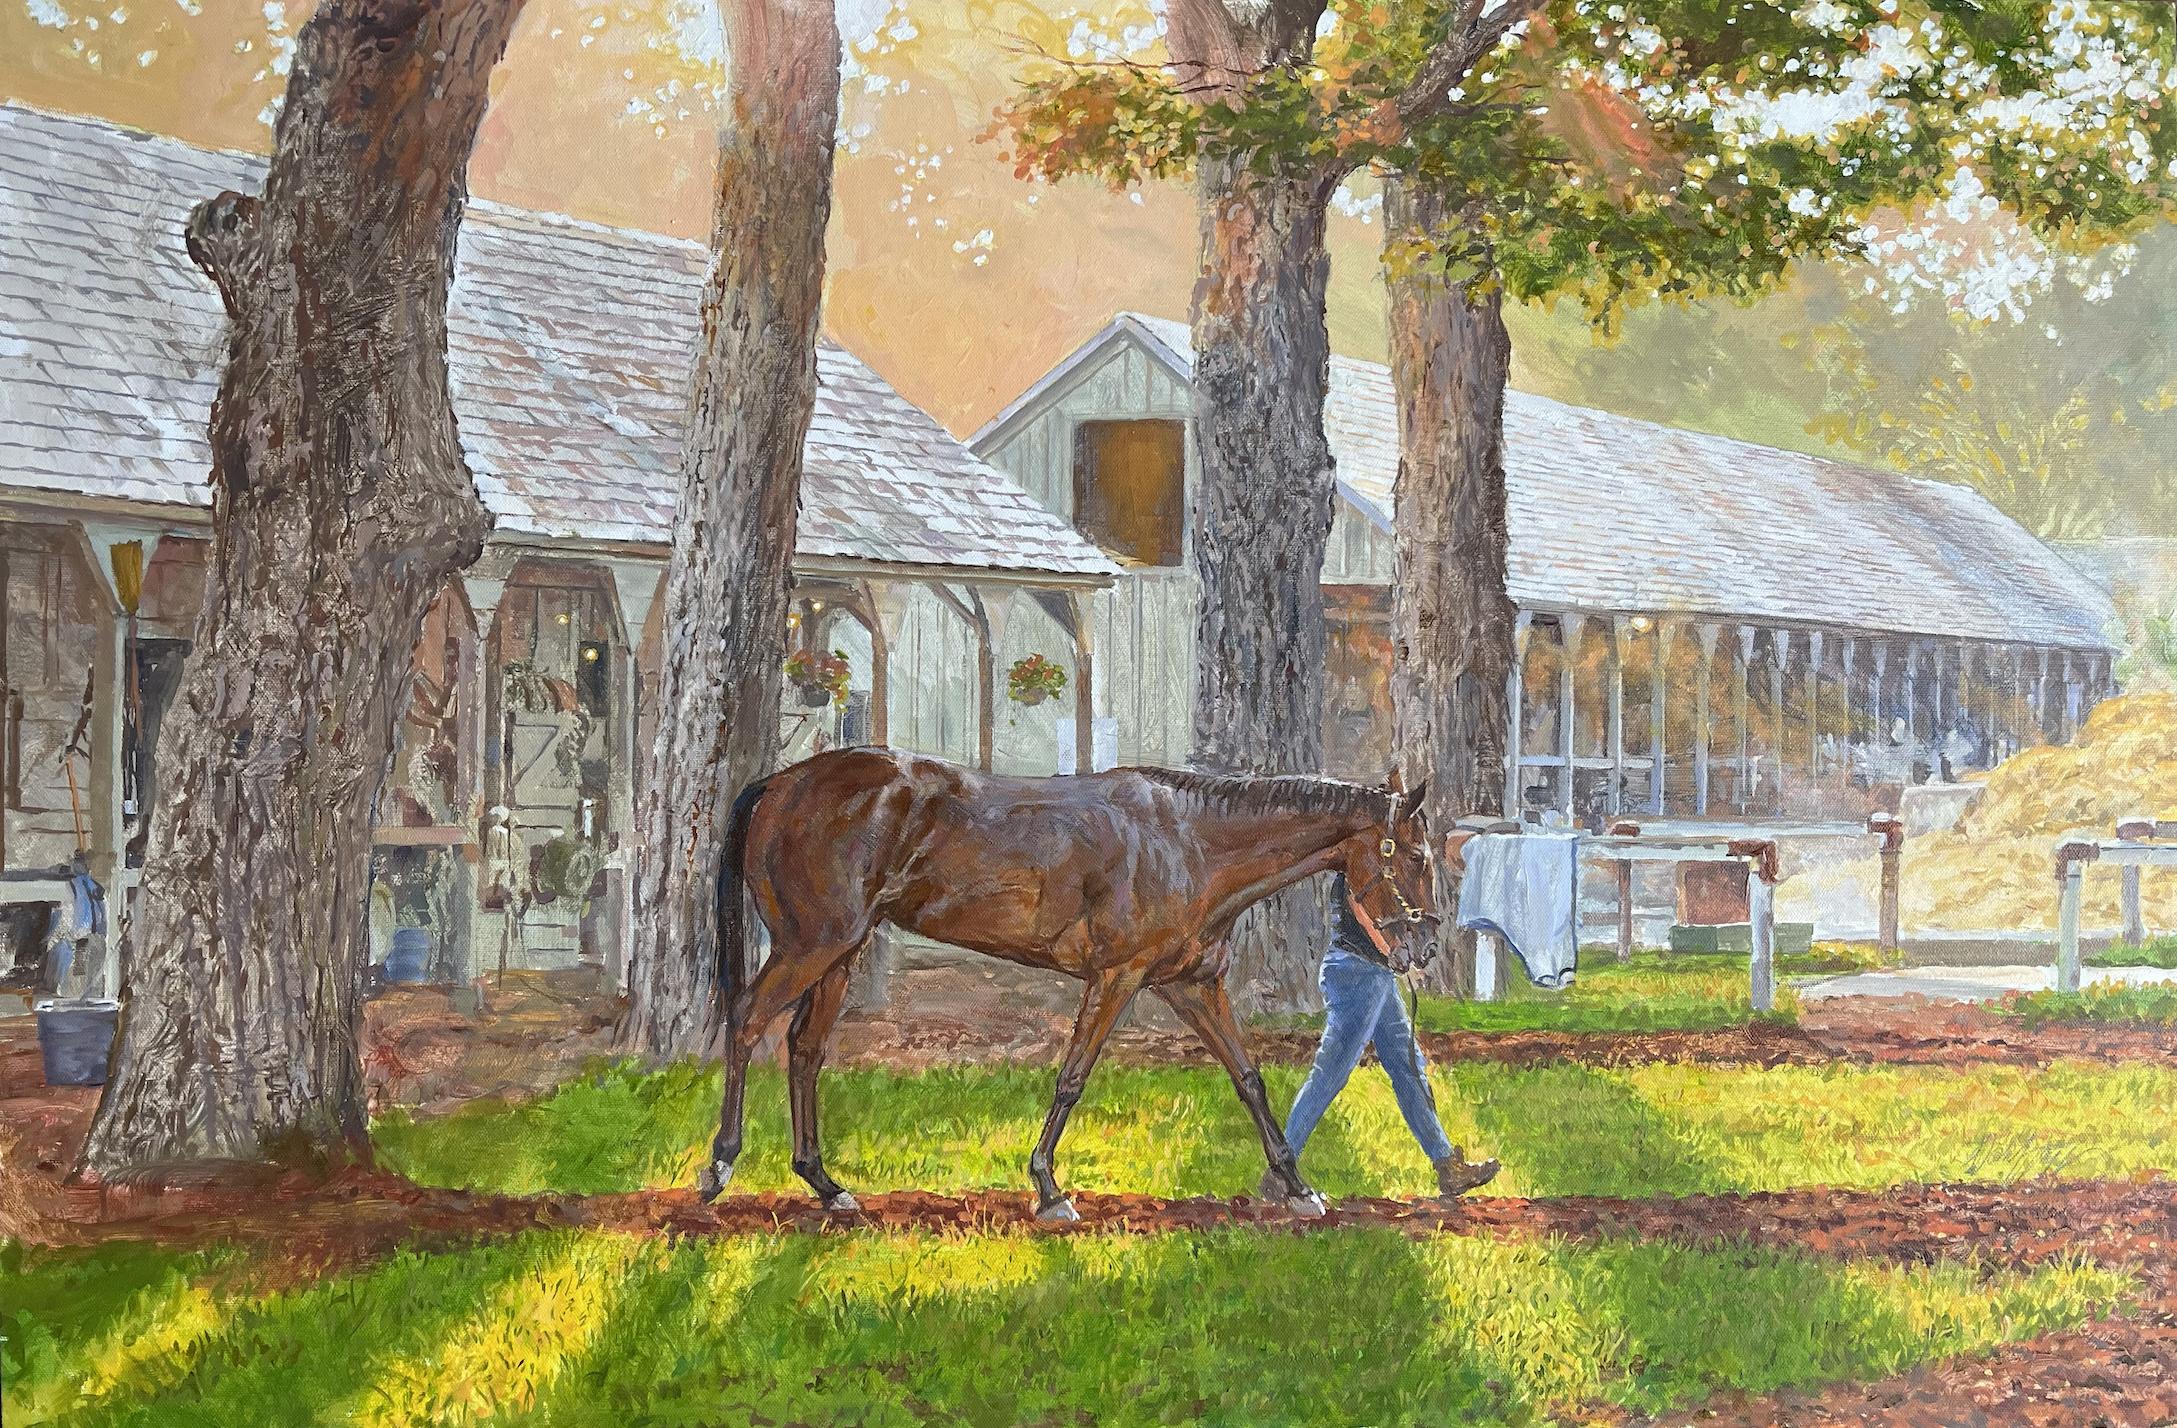 "Saratoga stables", is a 24x36 oil painting on canvas by artist Dahl Taylor featuring a brown horse being led back to the stable after morning workouts at Saratoga Race Course. Bright sun saturates the side of the green structure while a canopy of